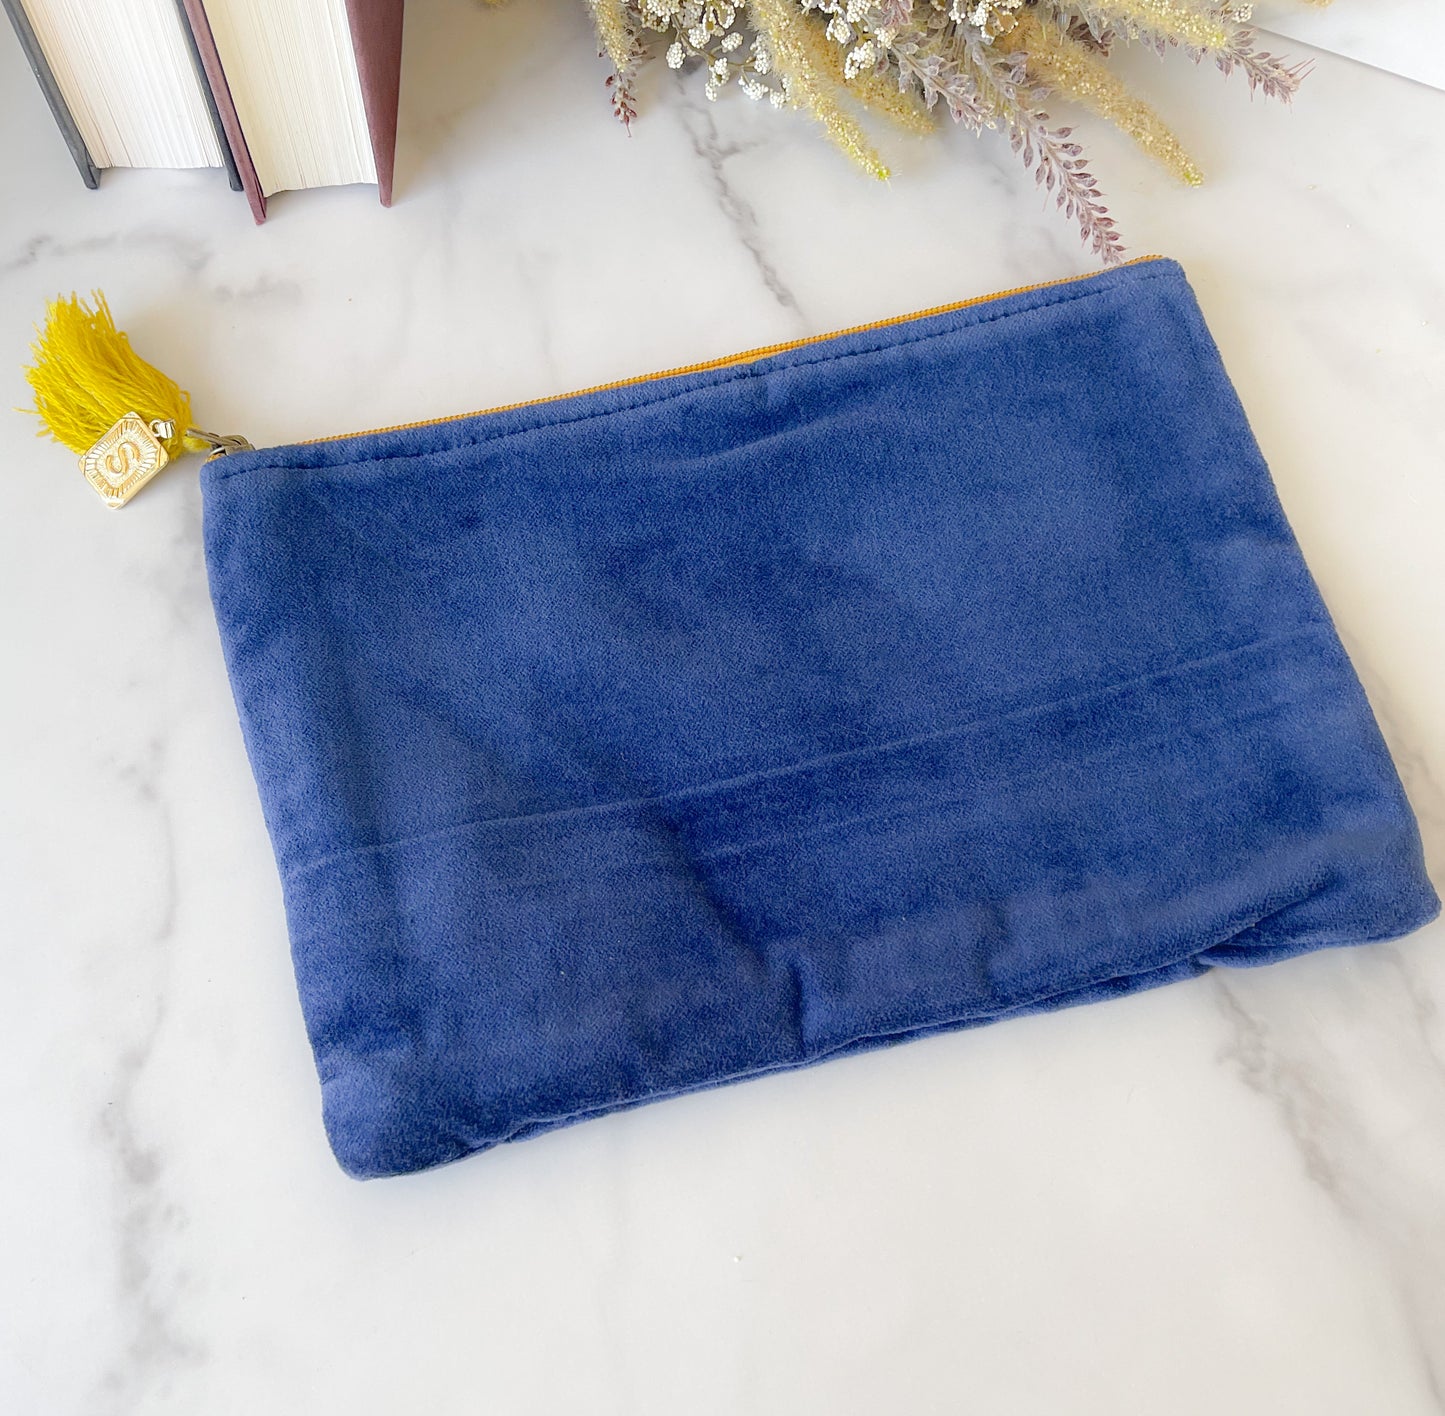 Velvet travel pouch - 6 color options (Personalization available)